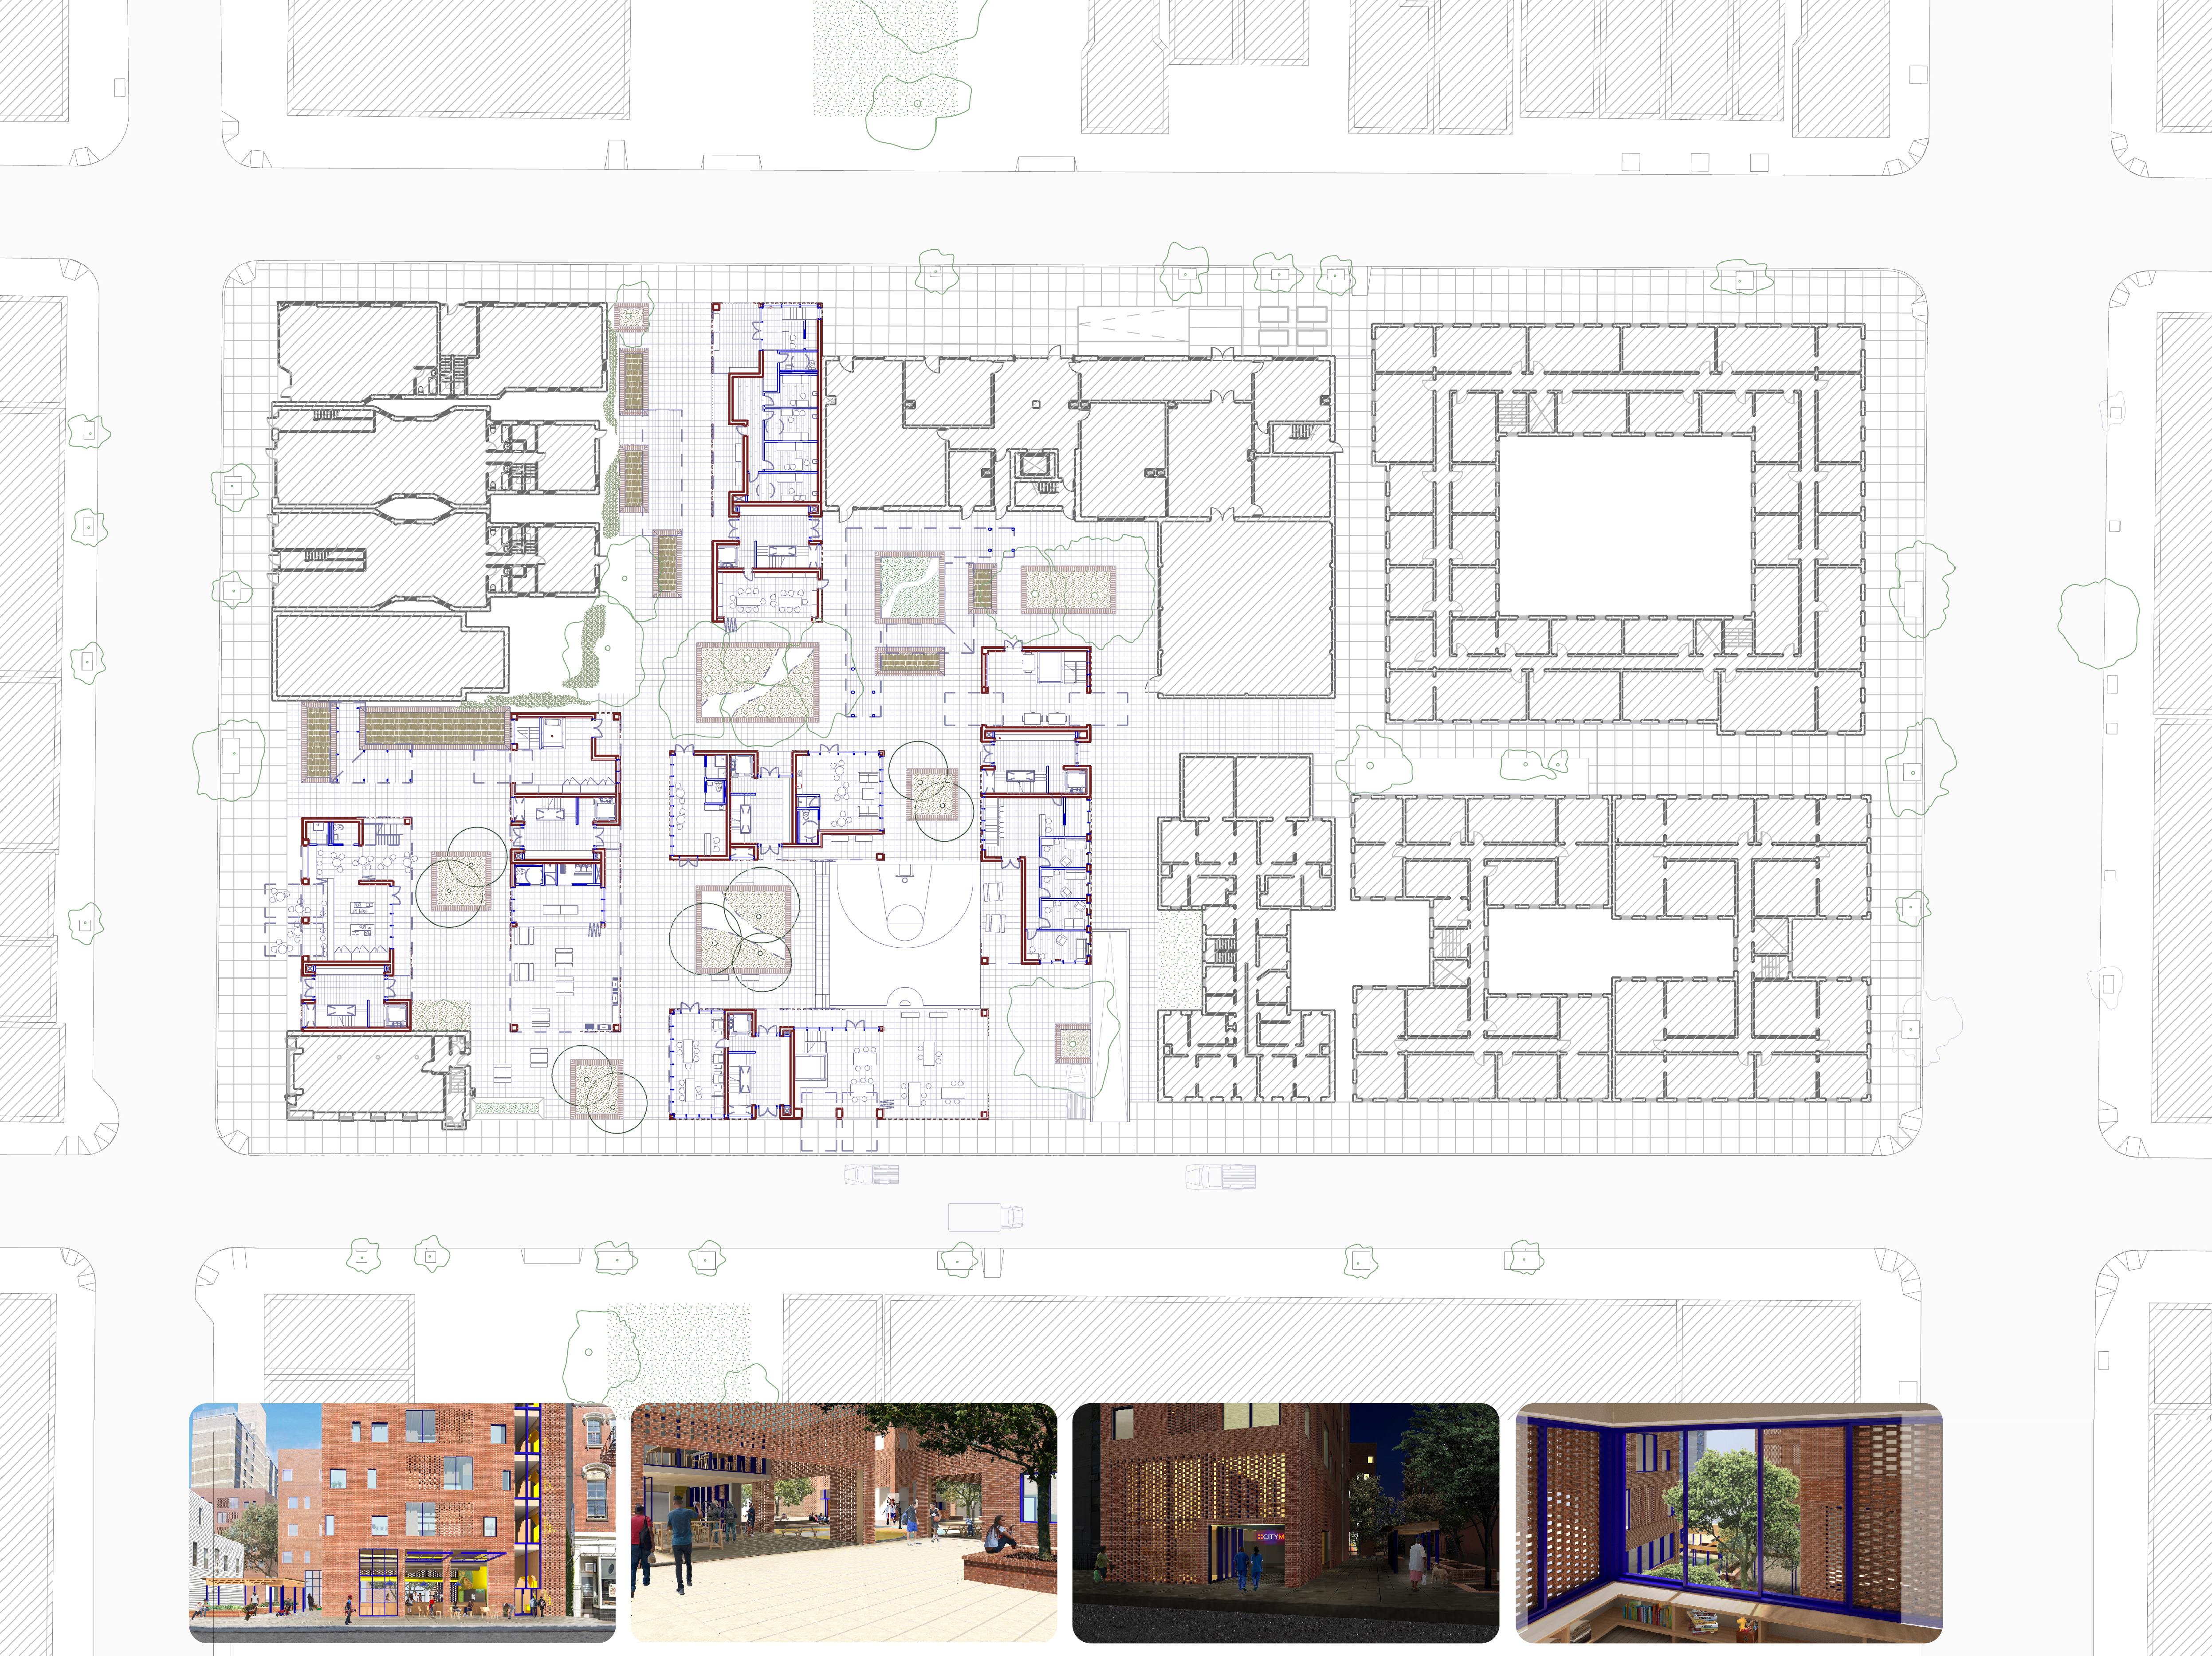 Floor plan of the project with three rendered views of the project's massing and terracotta-colored exterior brick finish, and one from within one of the unit's looking out at a landscaped courtyard